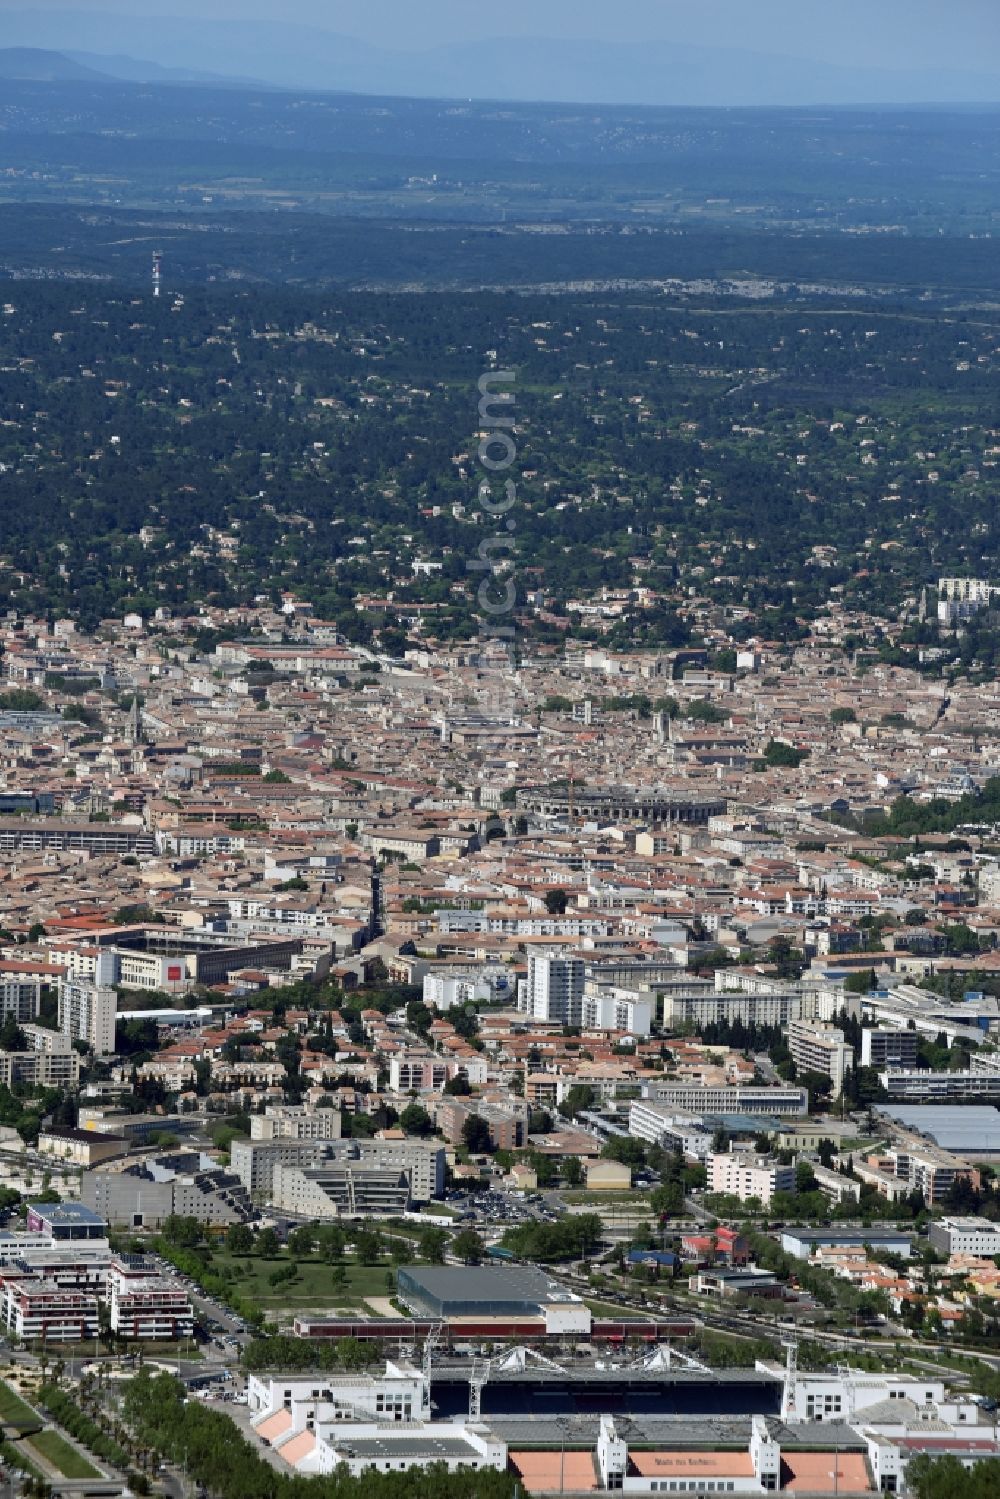 Aerial photograph Nîmes - City view of the city area of in Nimes in Languedoc-Roussillon Midi-Pyrenees, France